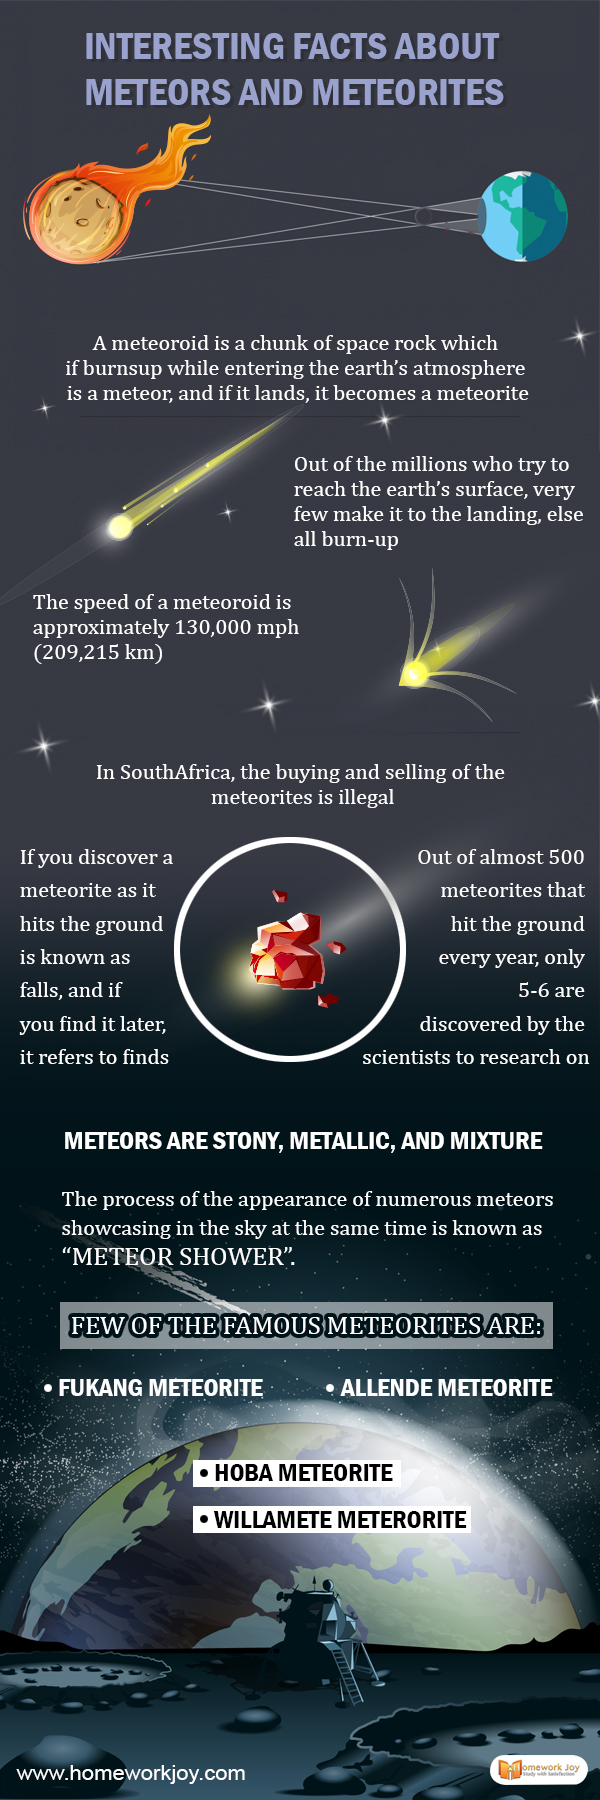 Interesting Facts About Meteors and Meteorites